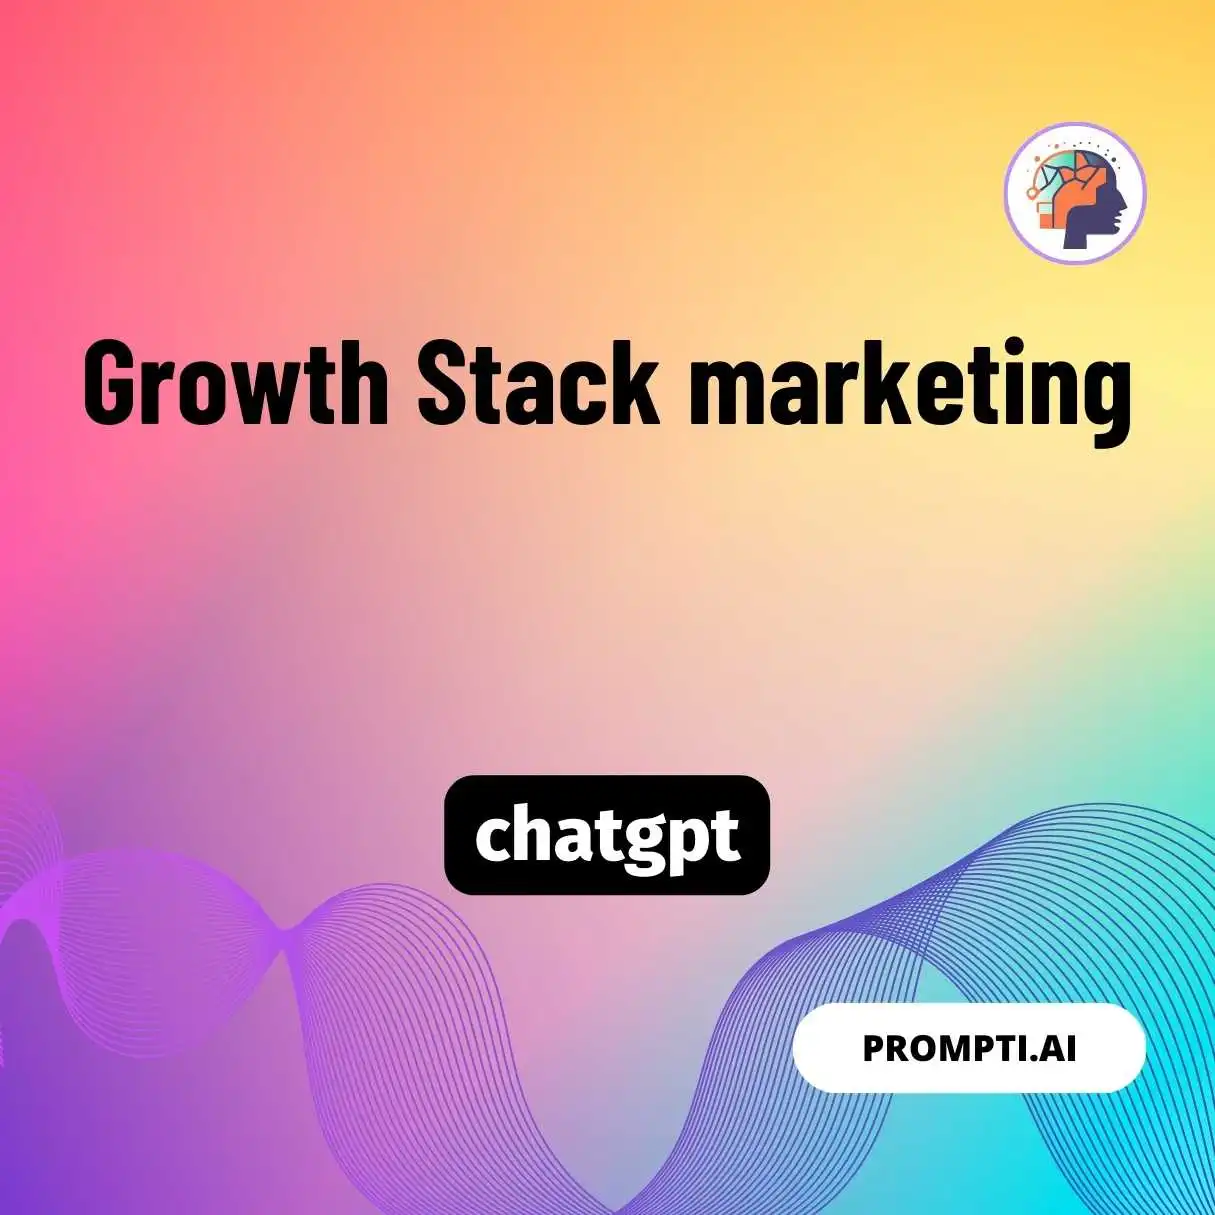 Growth Stack marketing